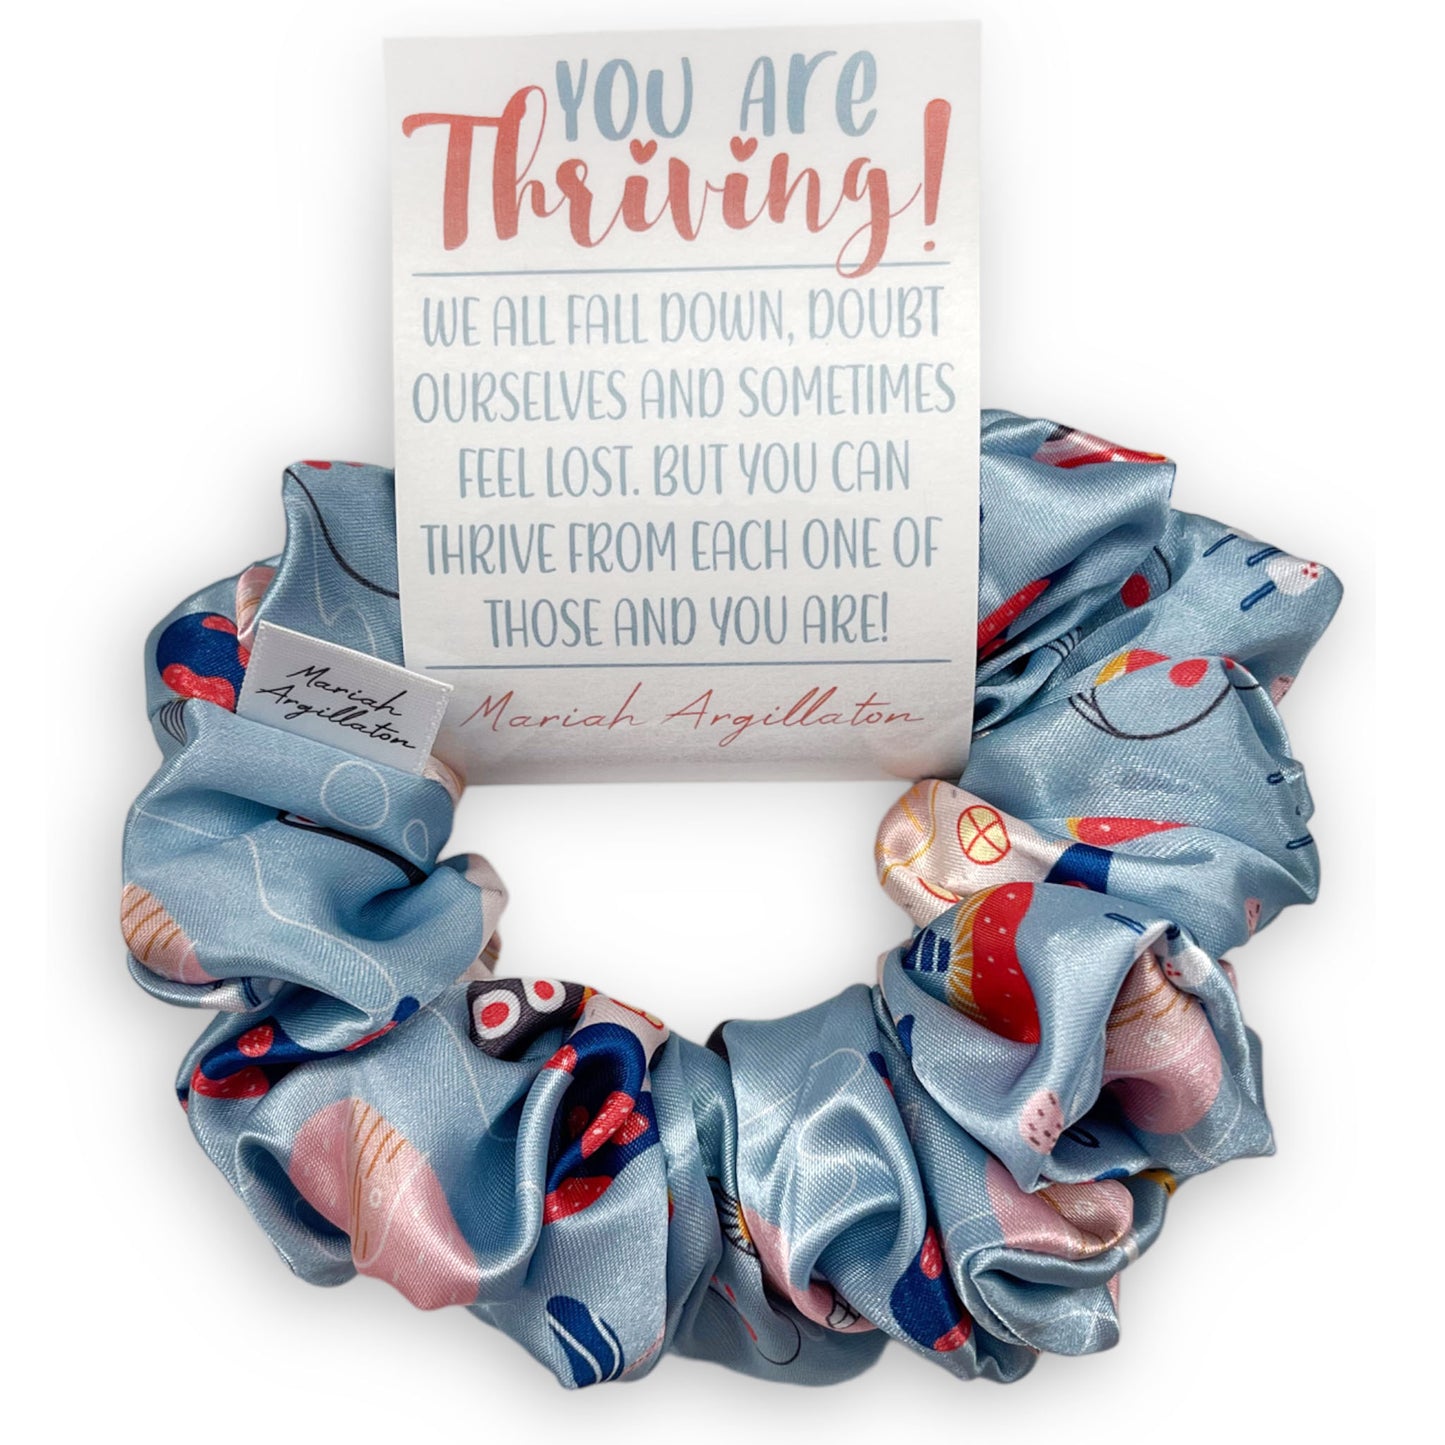 You Are Thriving! Regular Scrunchie!